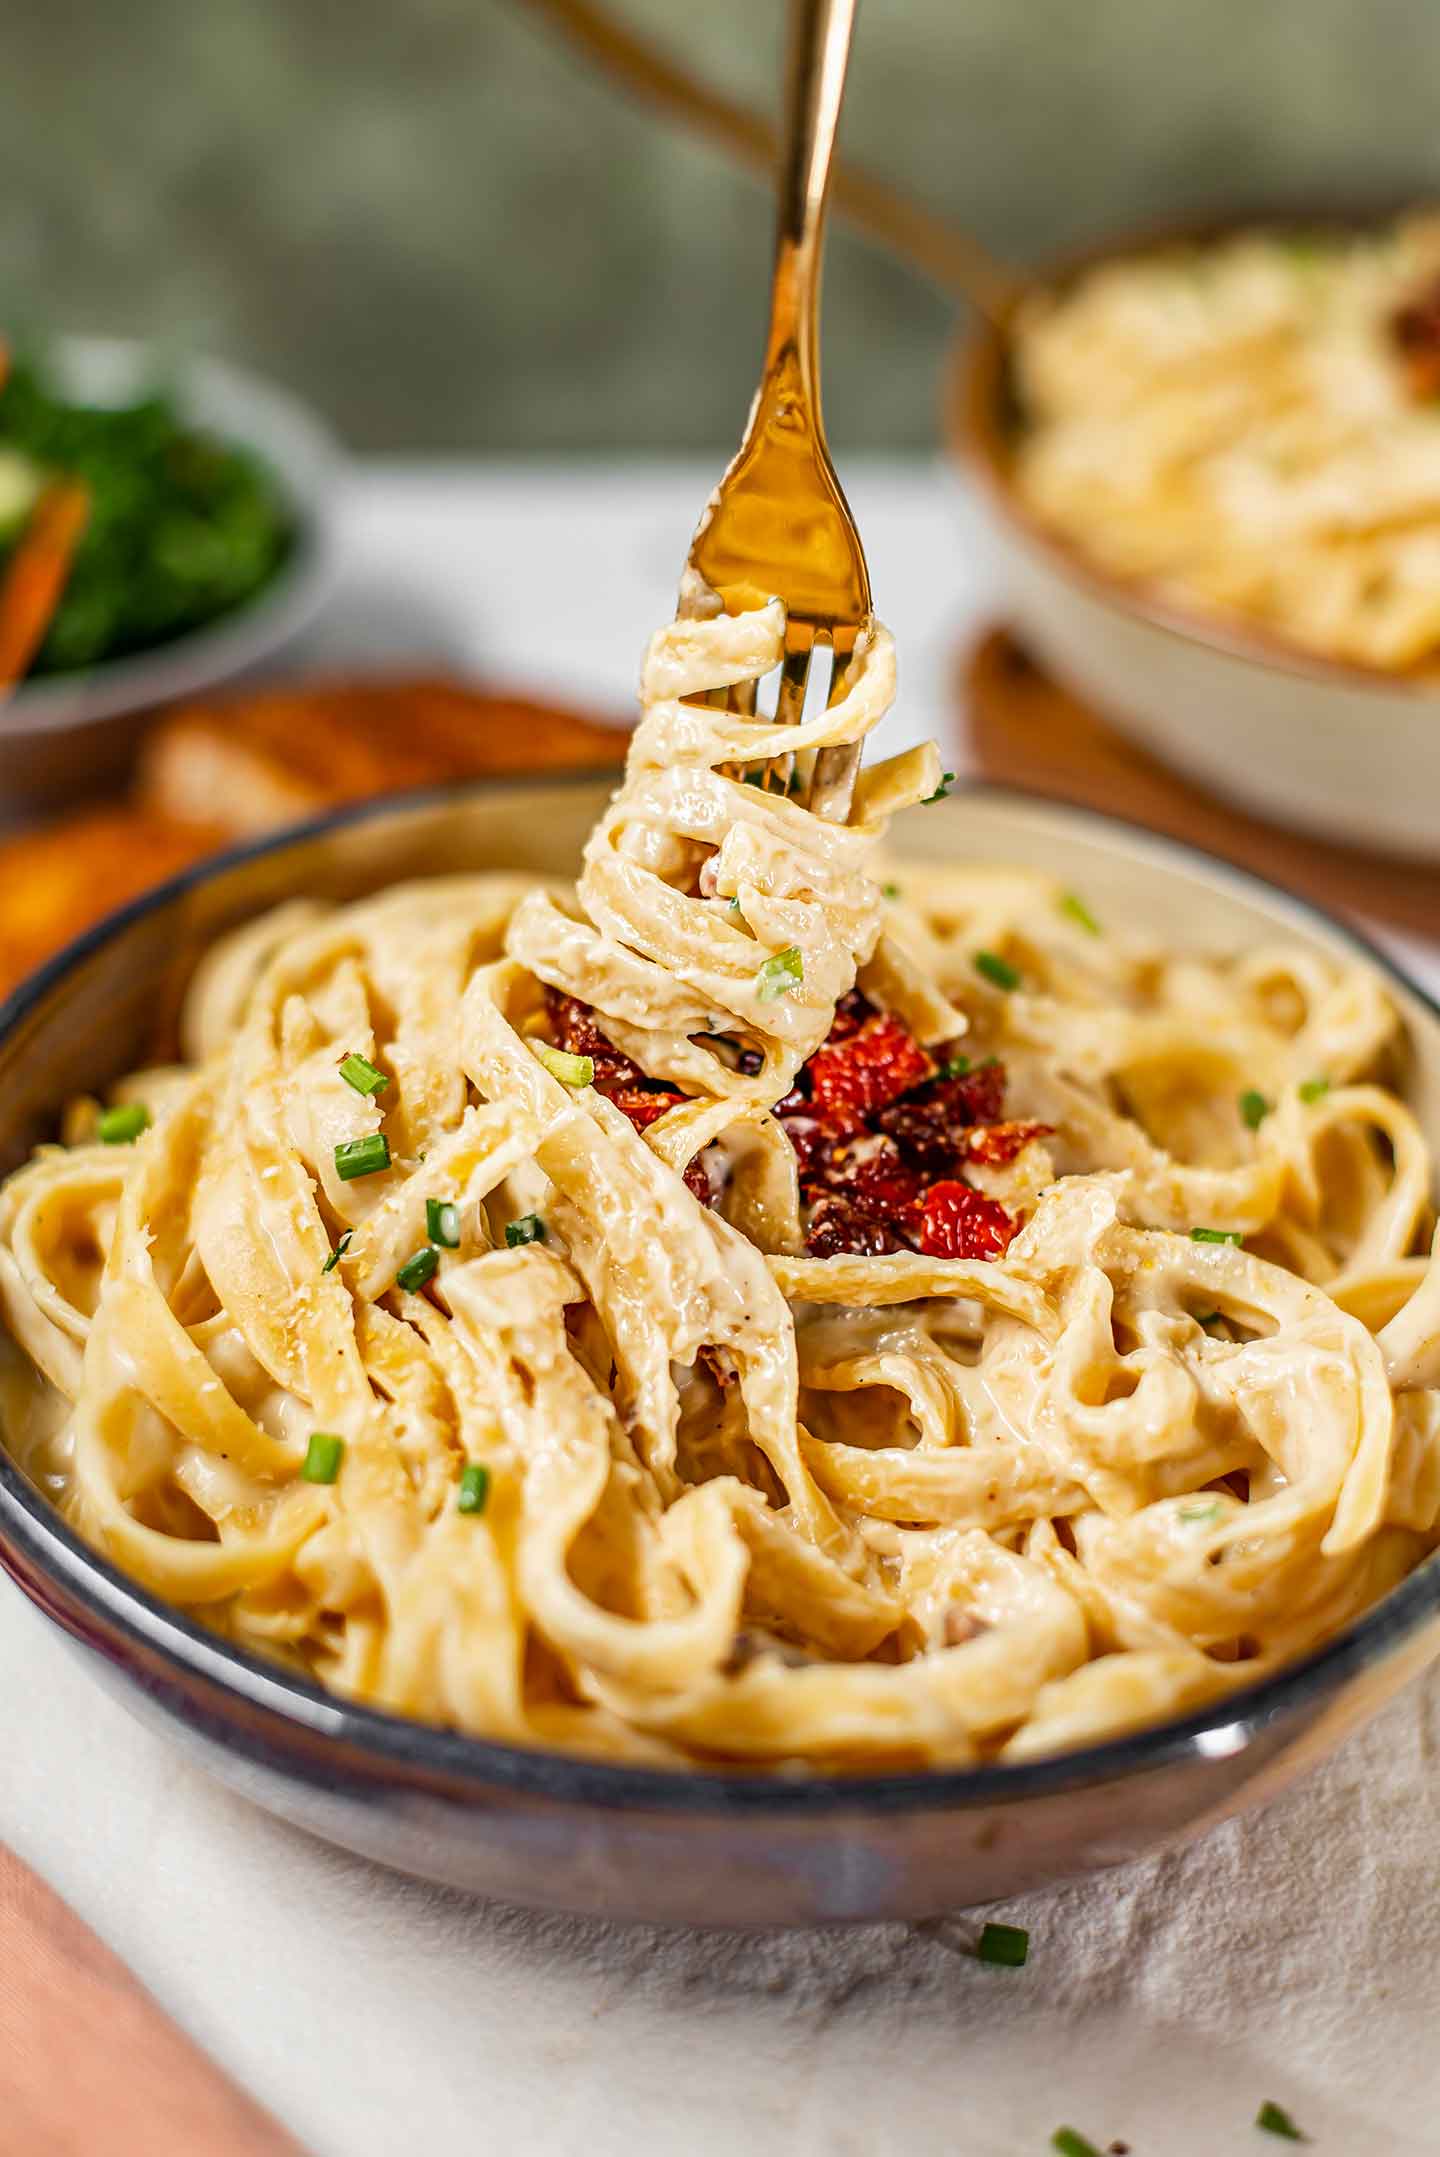 Side view of fettuccine noodles wrapped around a fork and lifting up from a bowl of creamy dairy-free fettuccine alfredo.